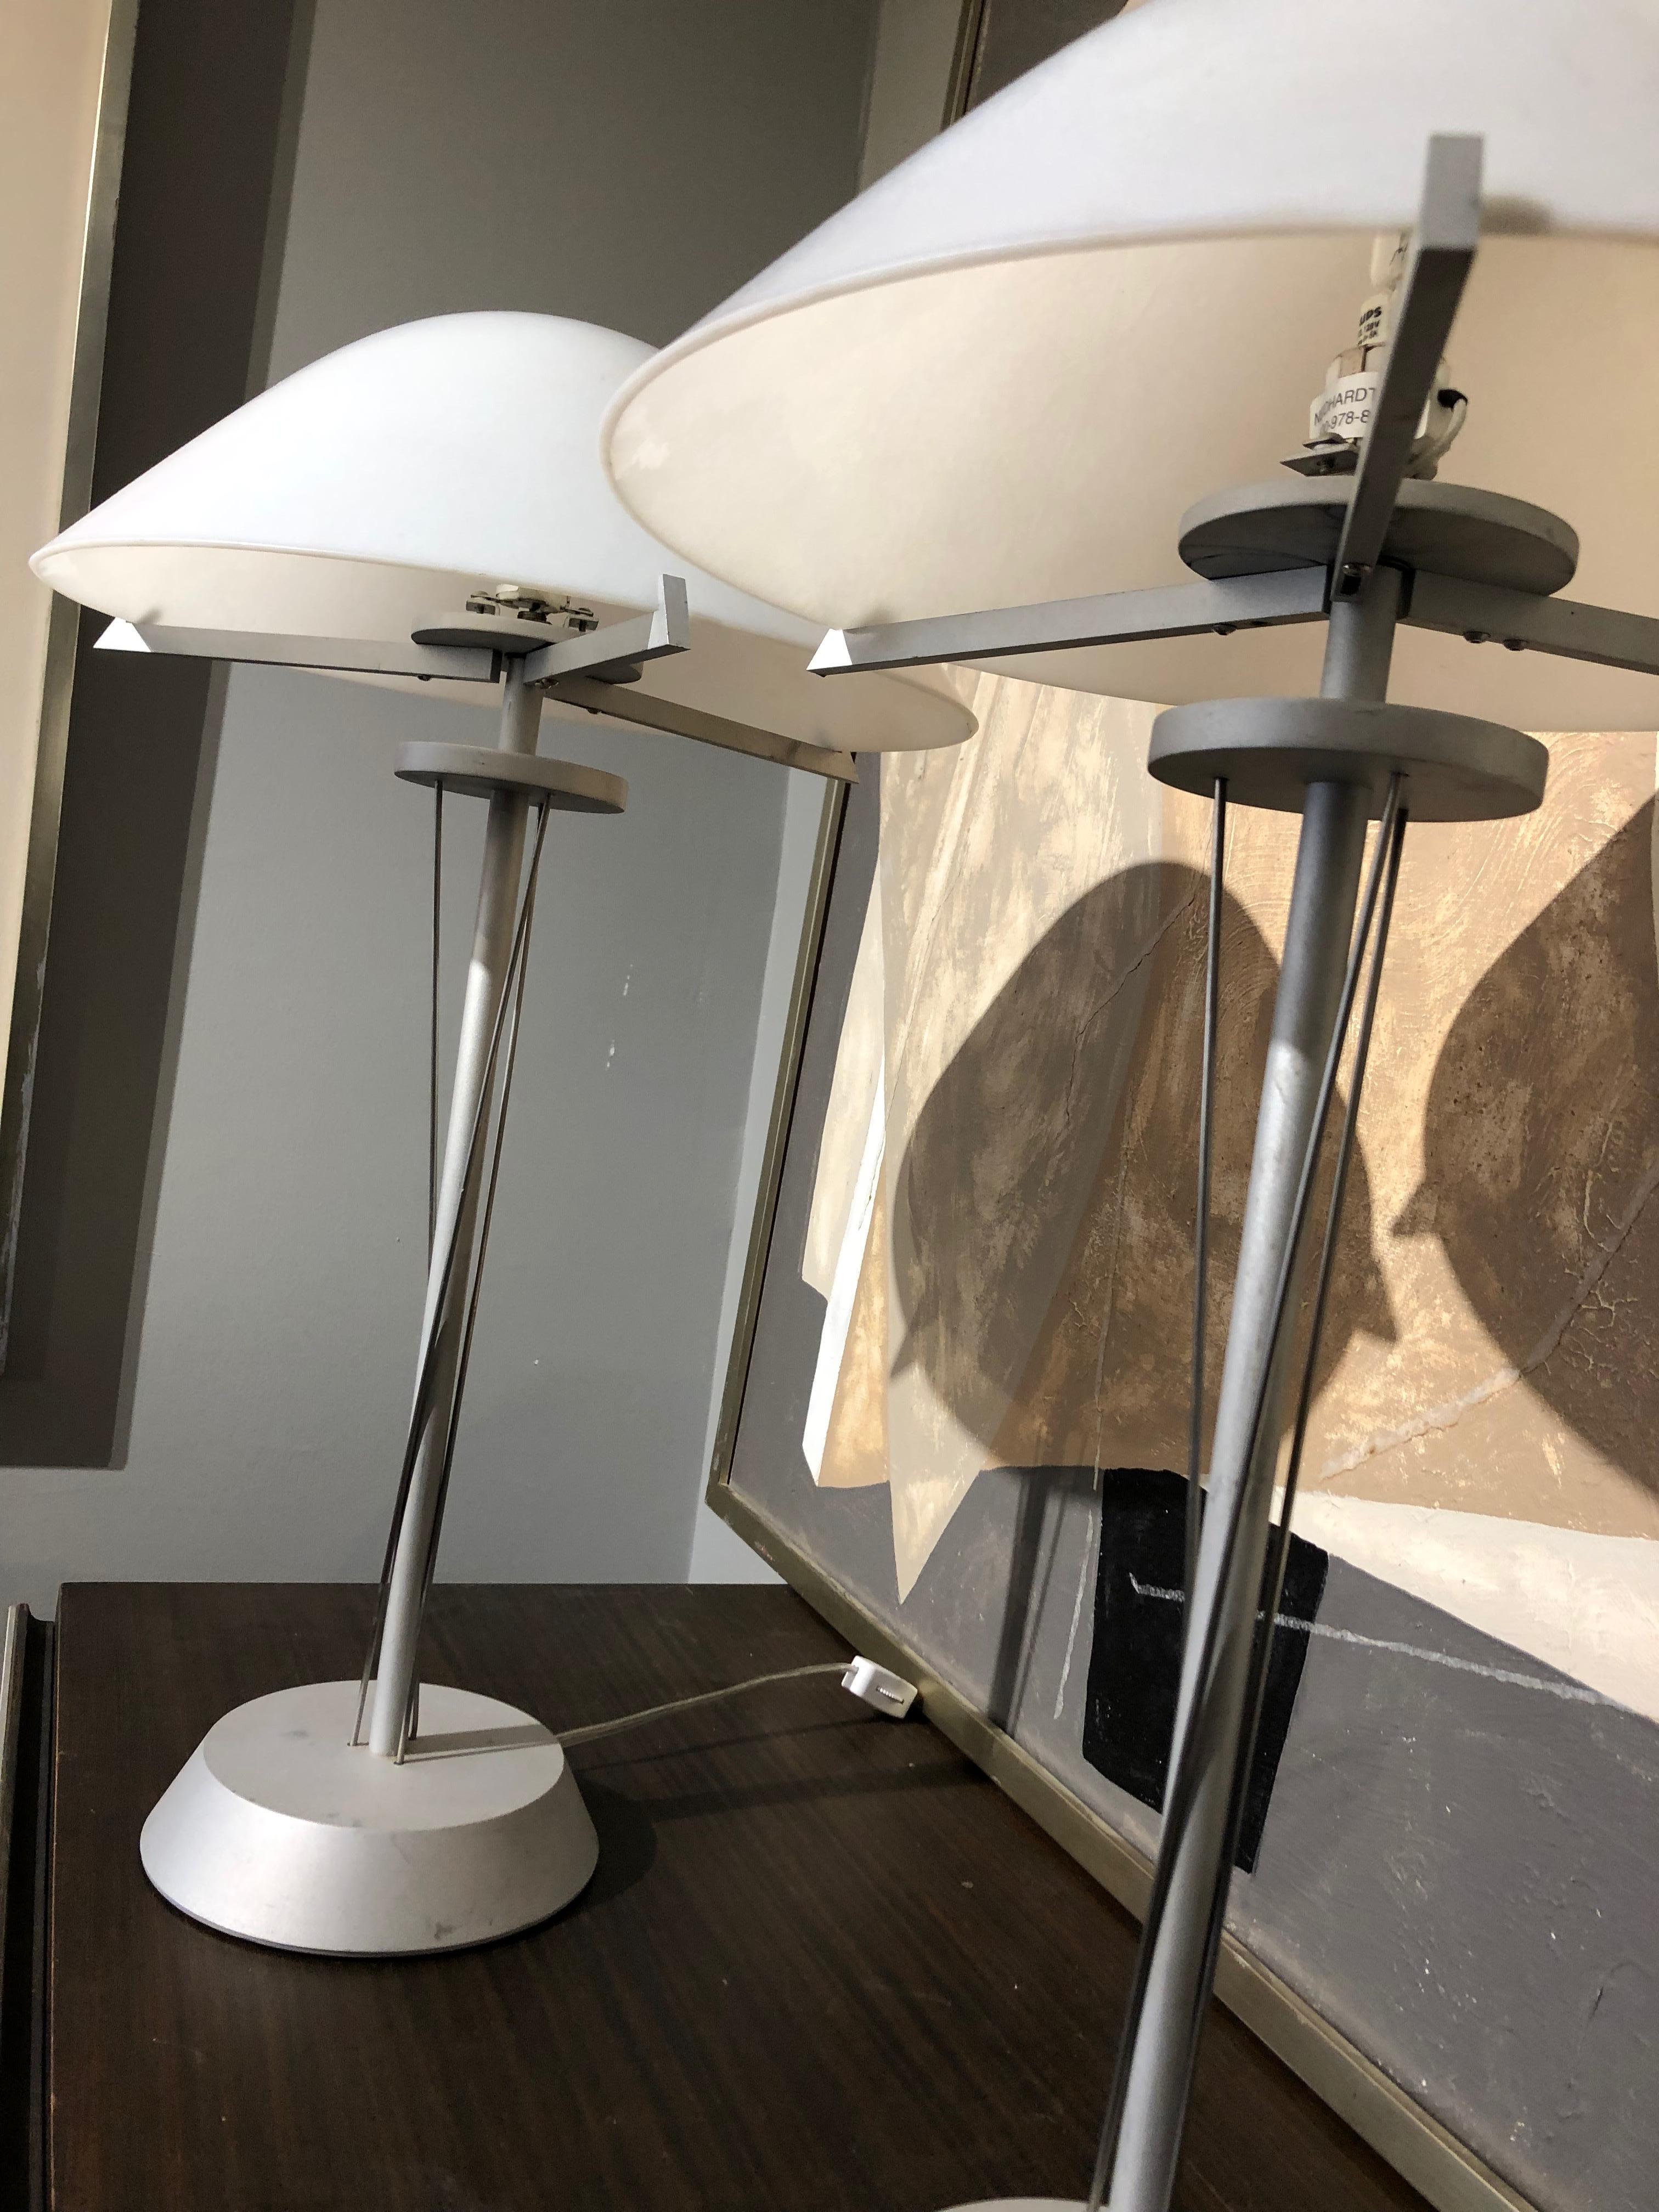 Pair of 20th Century German Postmodern steel lamps with white milk glass shades.
A sleek and interesting addition to any room. Made of brushed steel with milk glass shades that have a beautiful pearlescent sheen. One shade has a small chip and